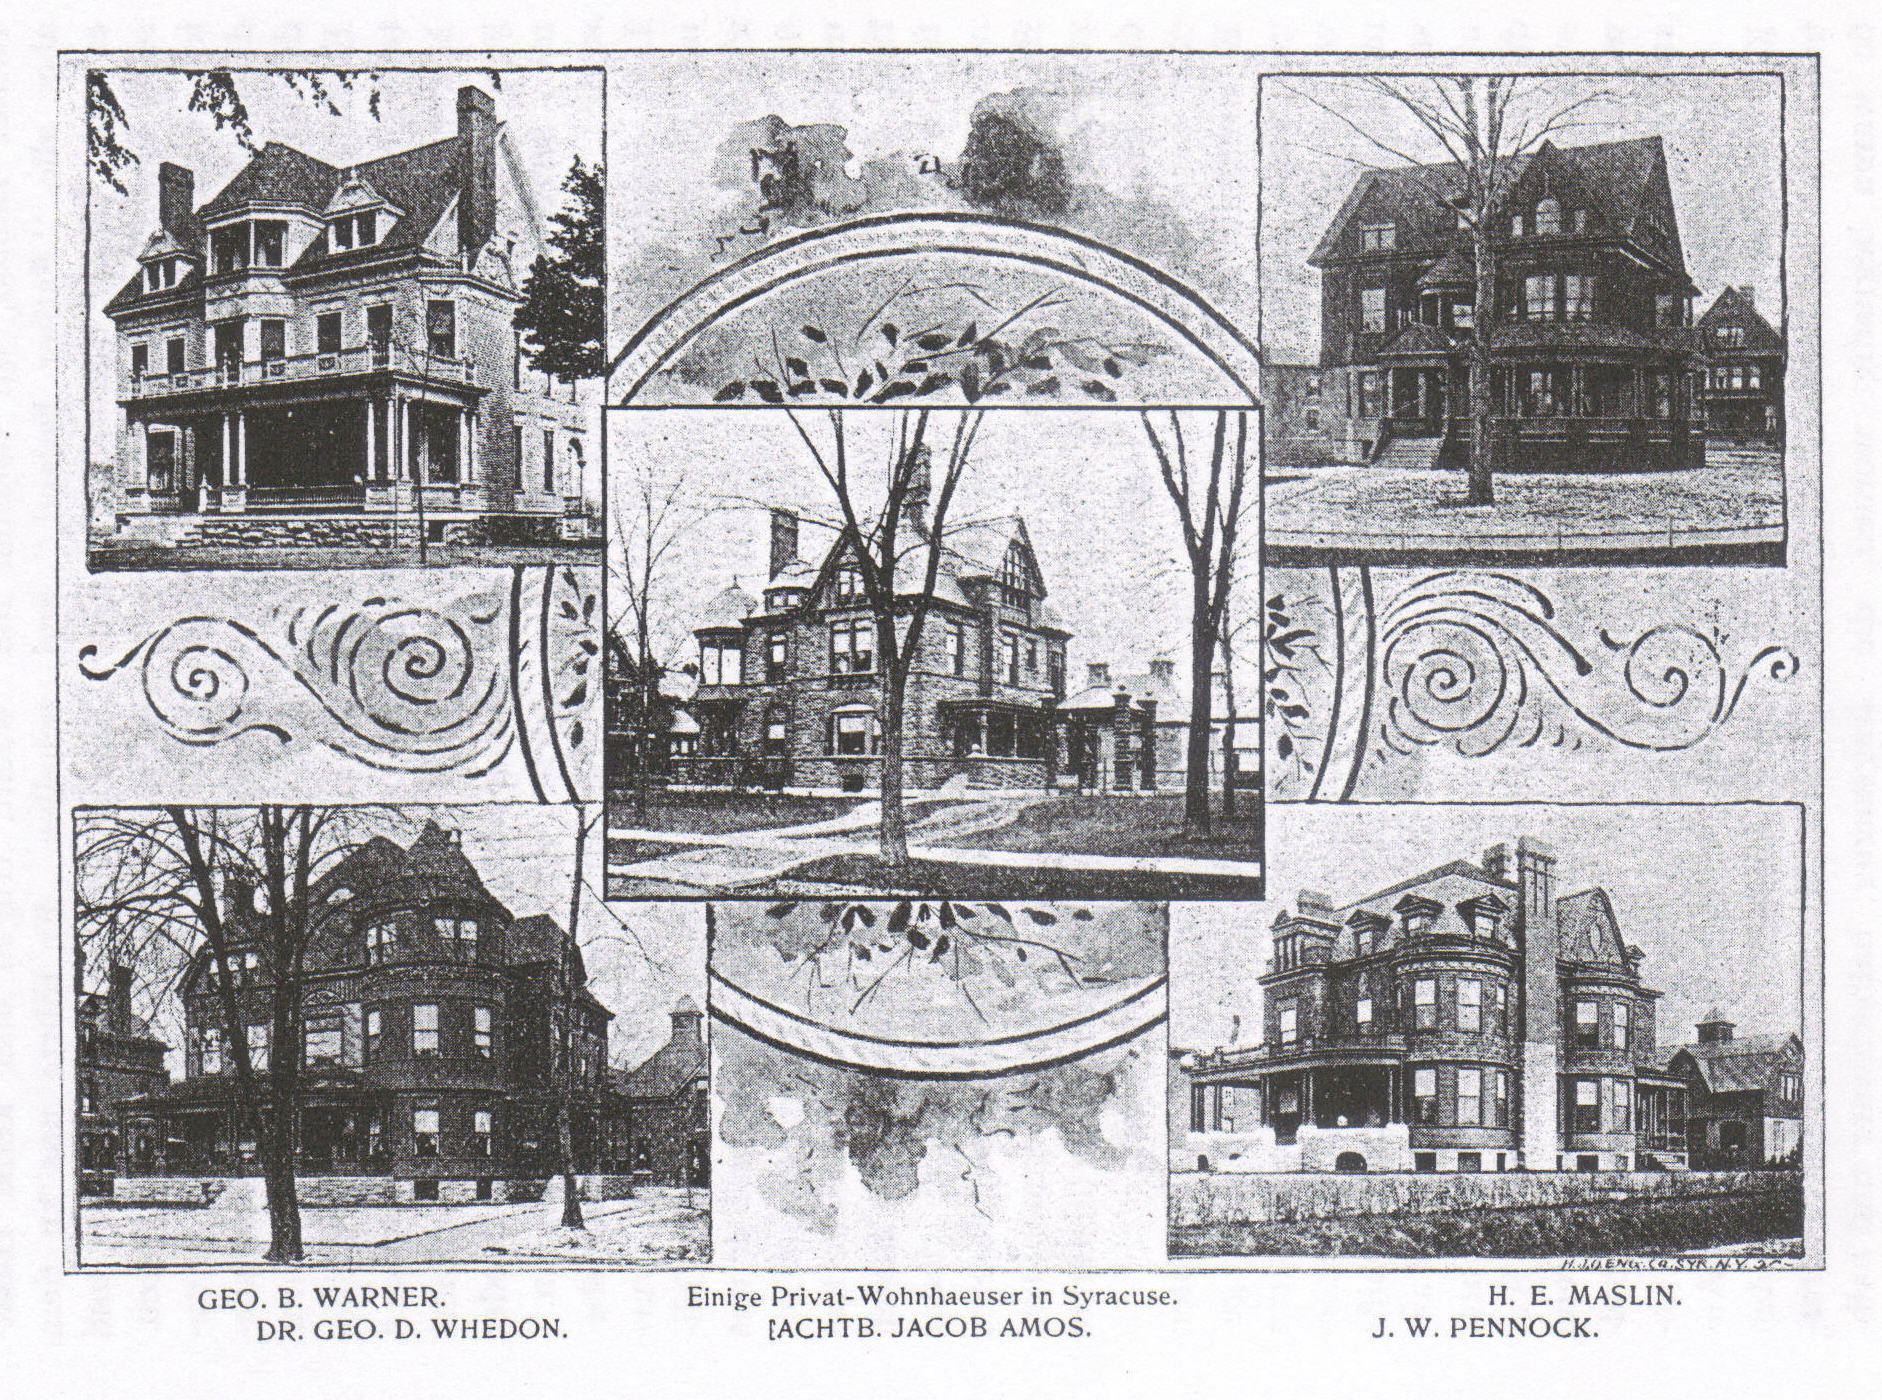 Some private residences in Syracuse